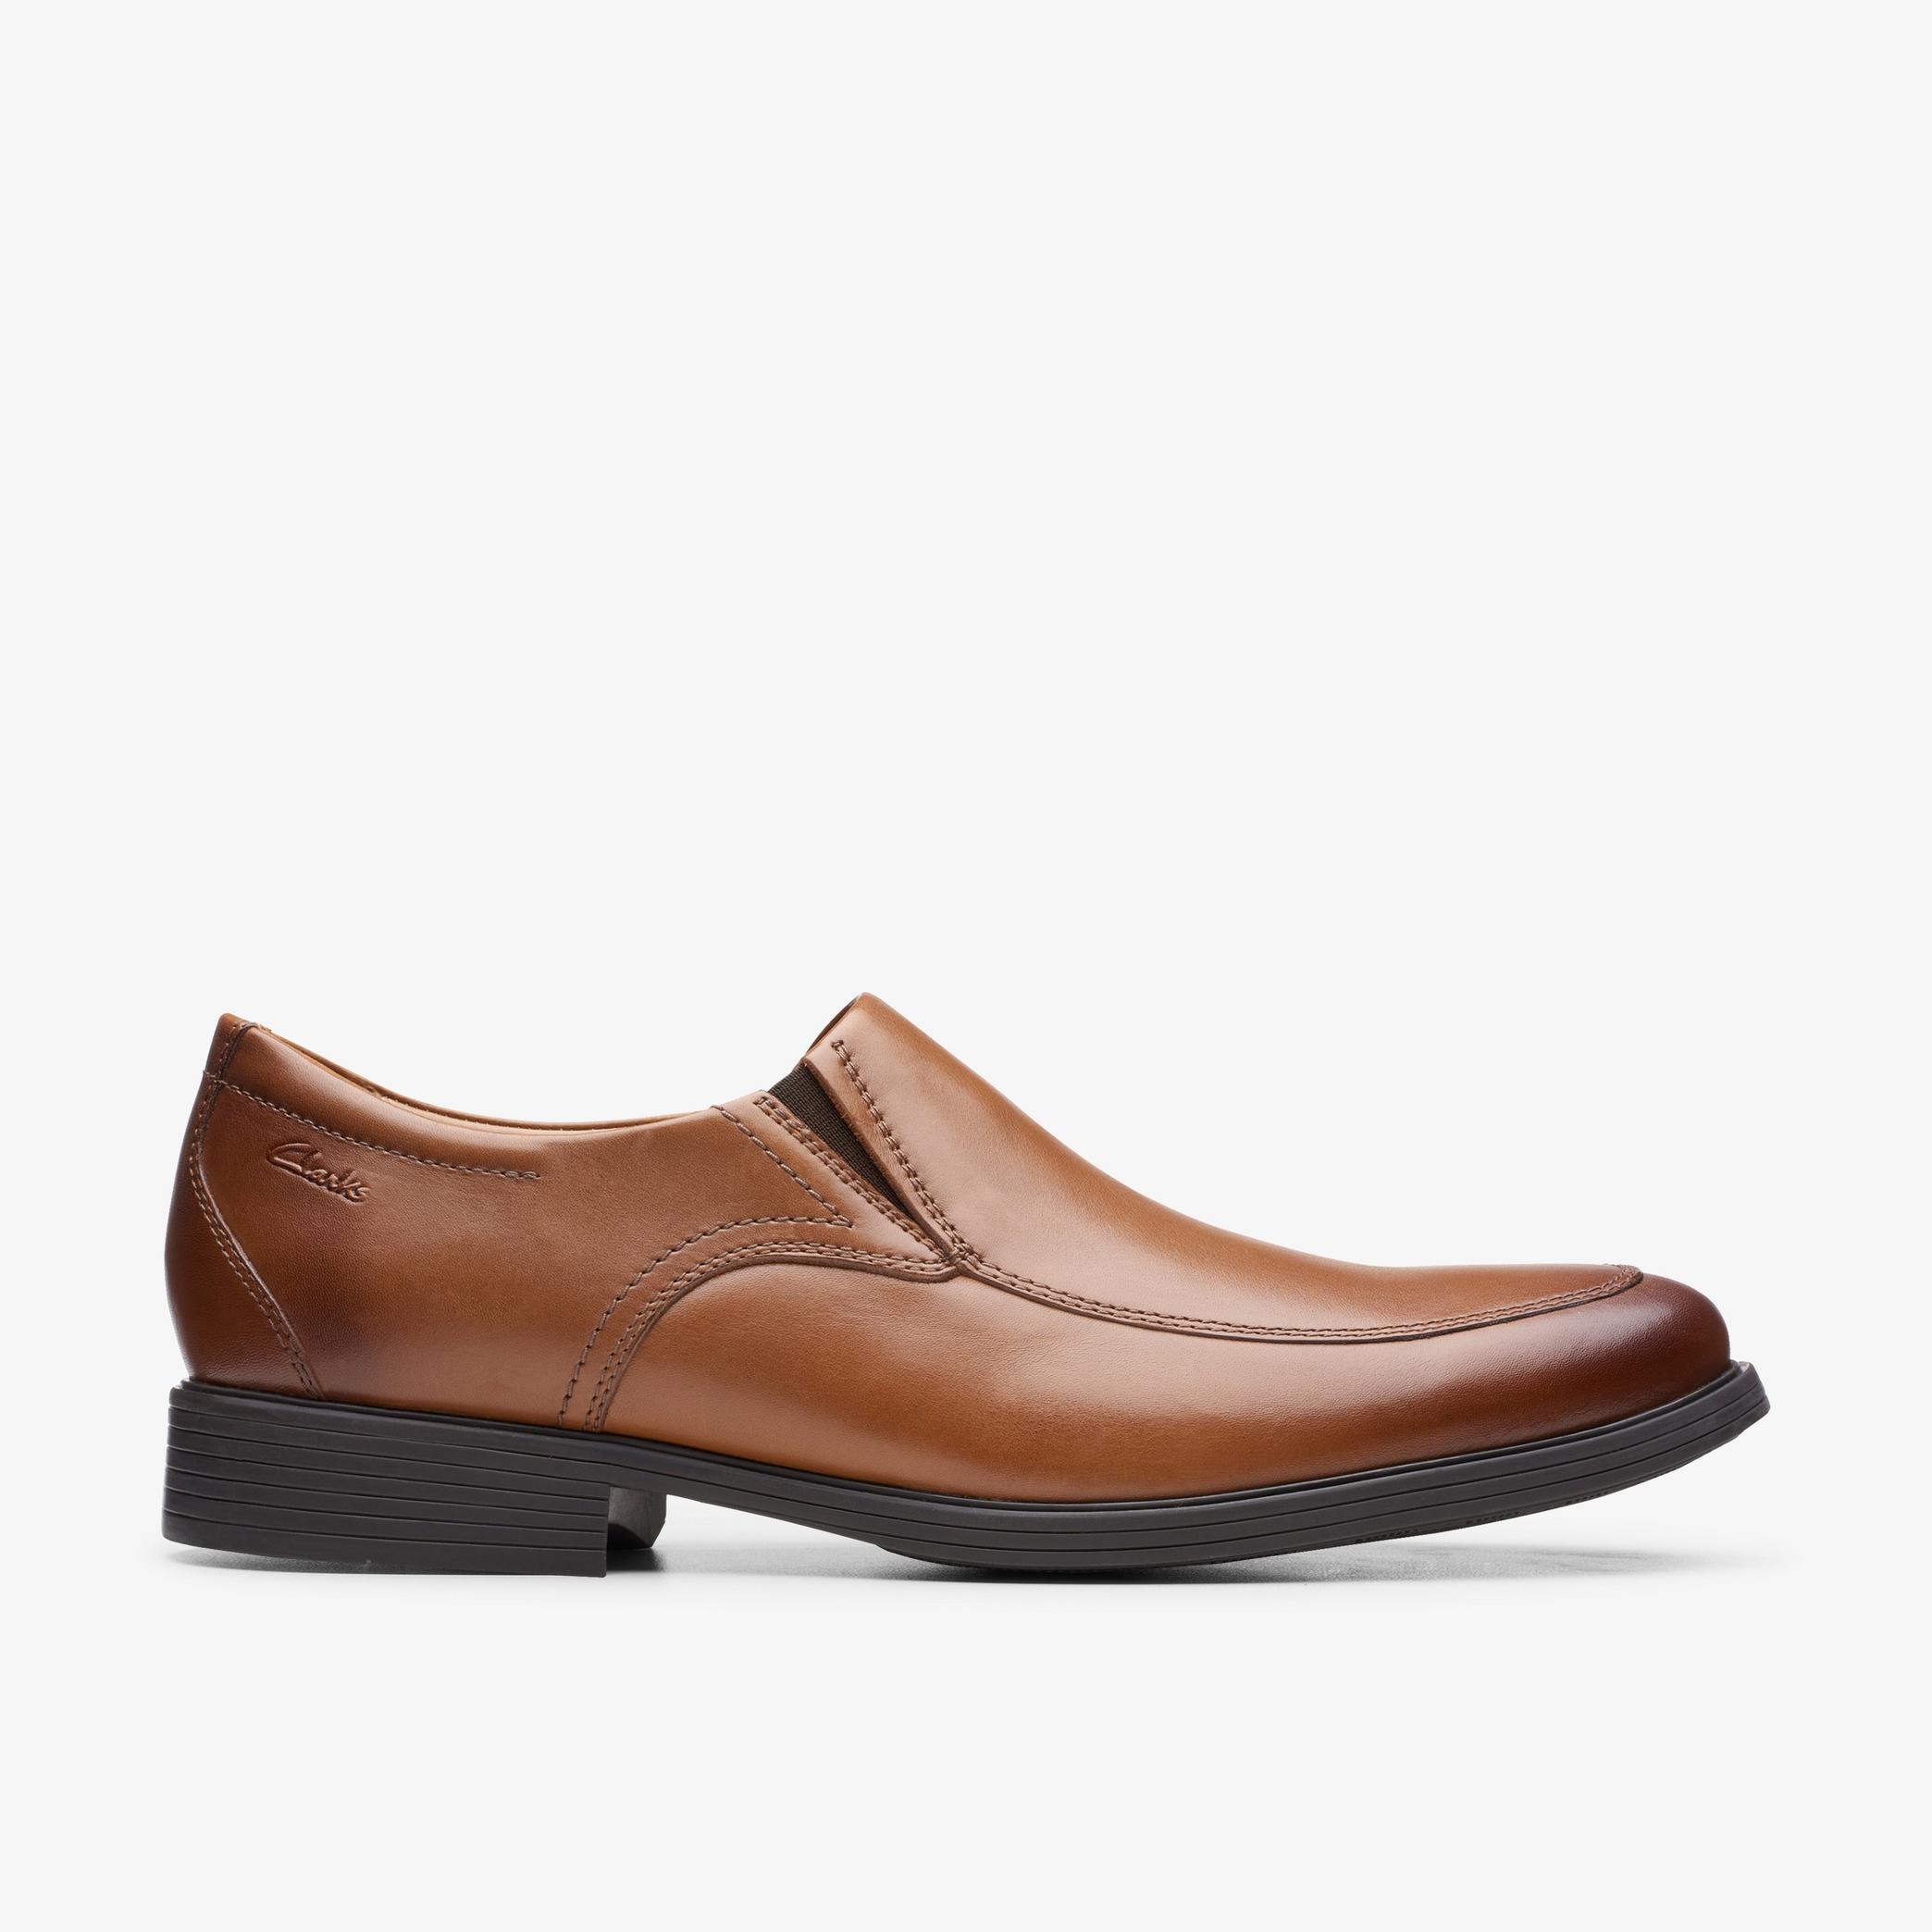 Whiddon Step Dark Tan Leather Loafers, view 1 of 6